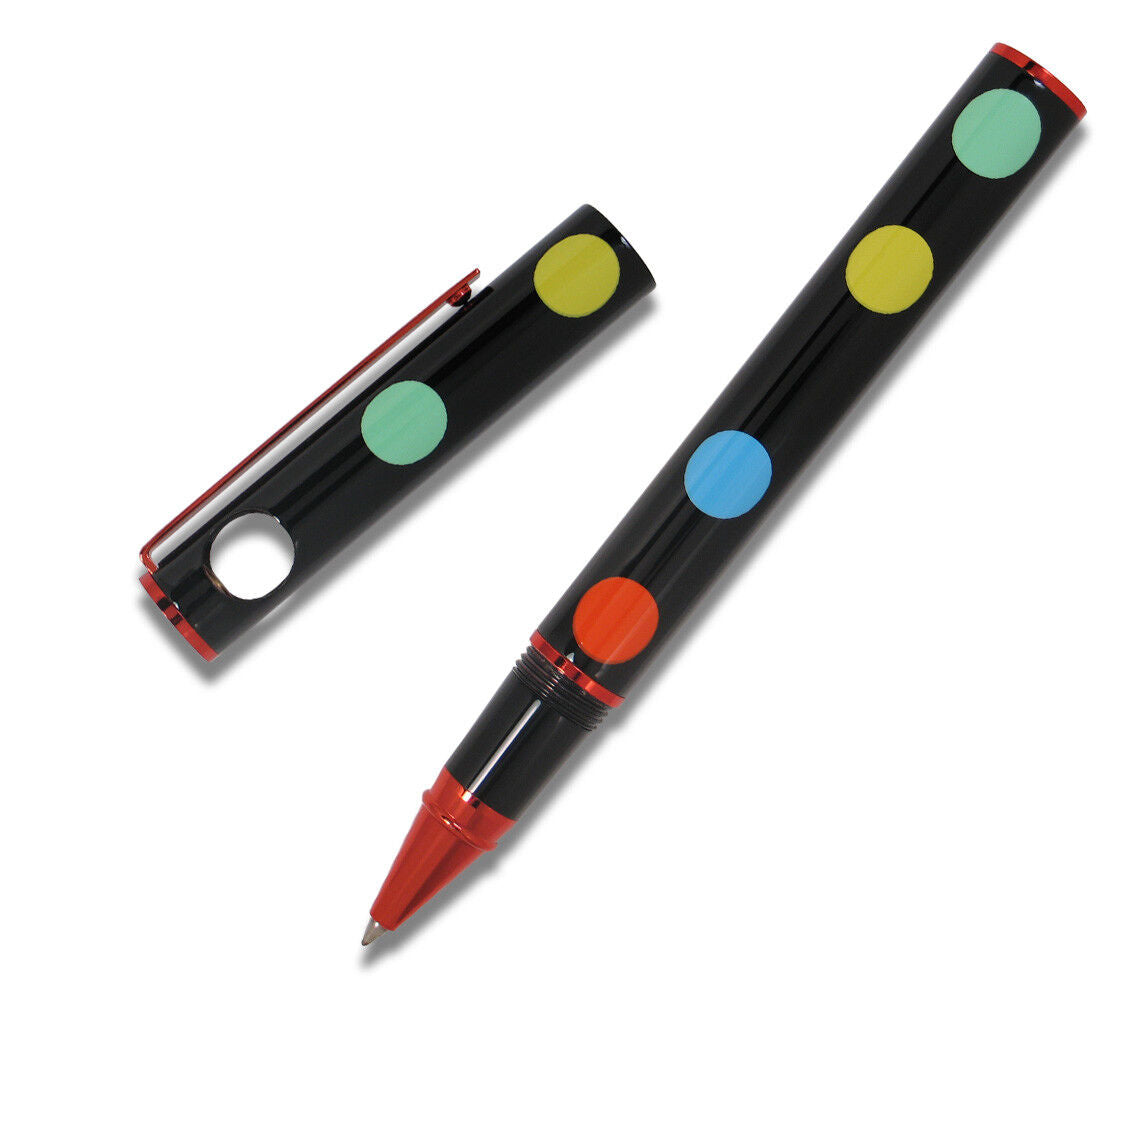 ACME Studio “Color Dots" Limited Edition Roller Ball Pen by G. MEYER - NEW